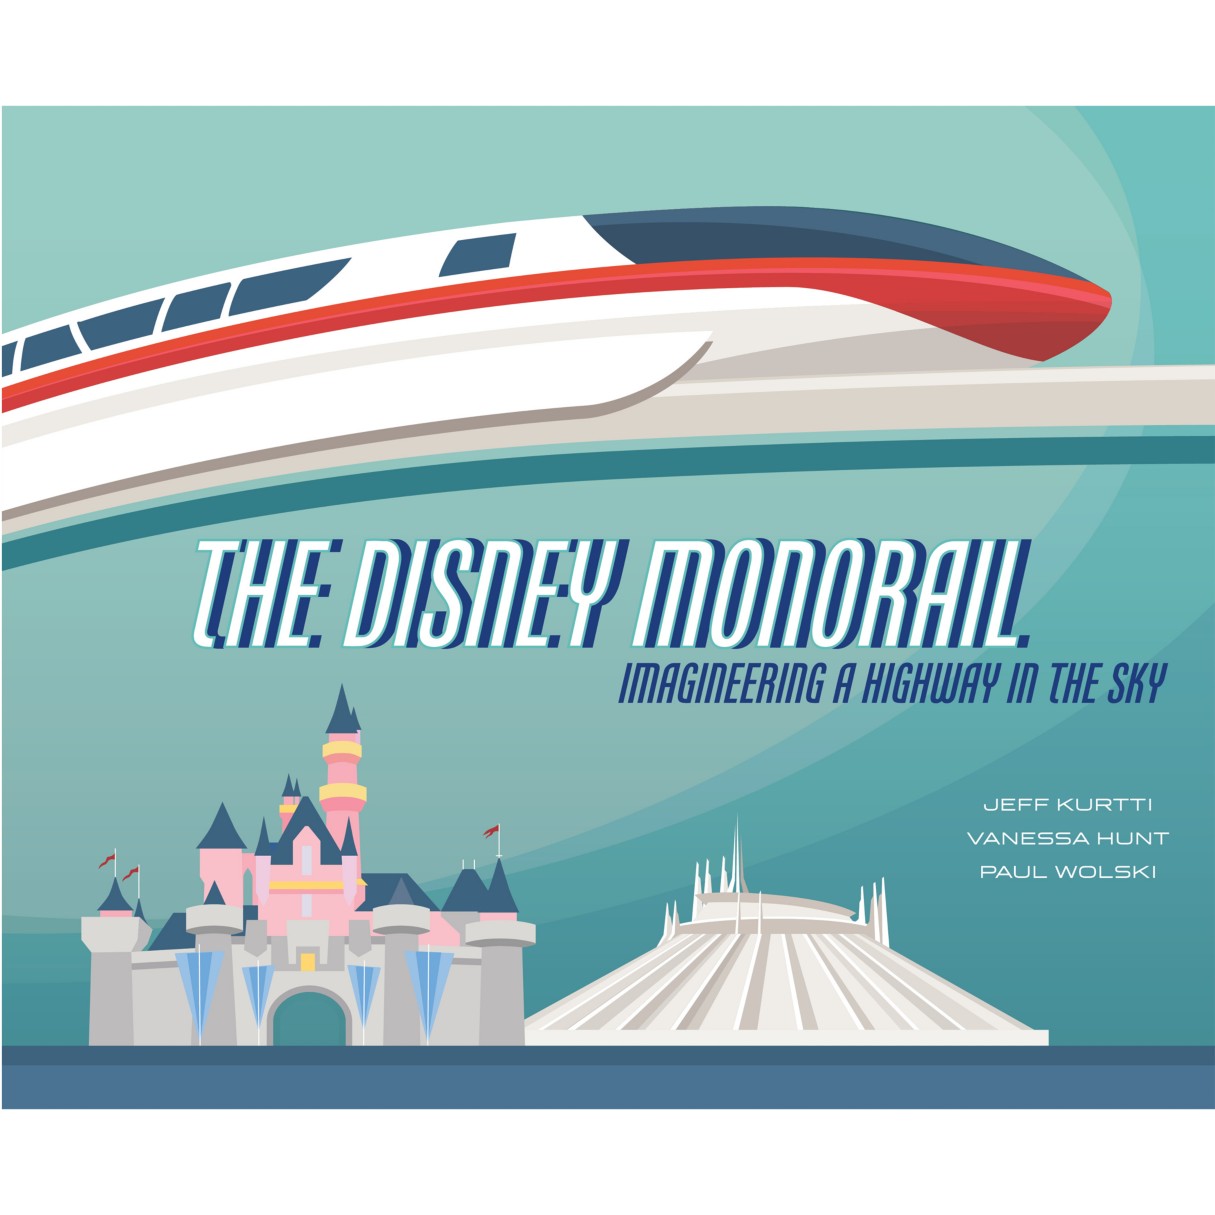 The Disney Monorail: Imagineering a Highway in the Sky Book